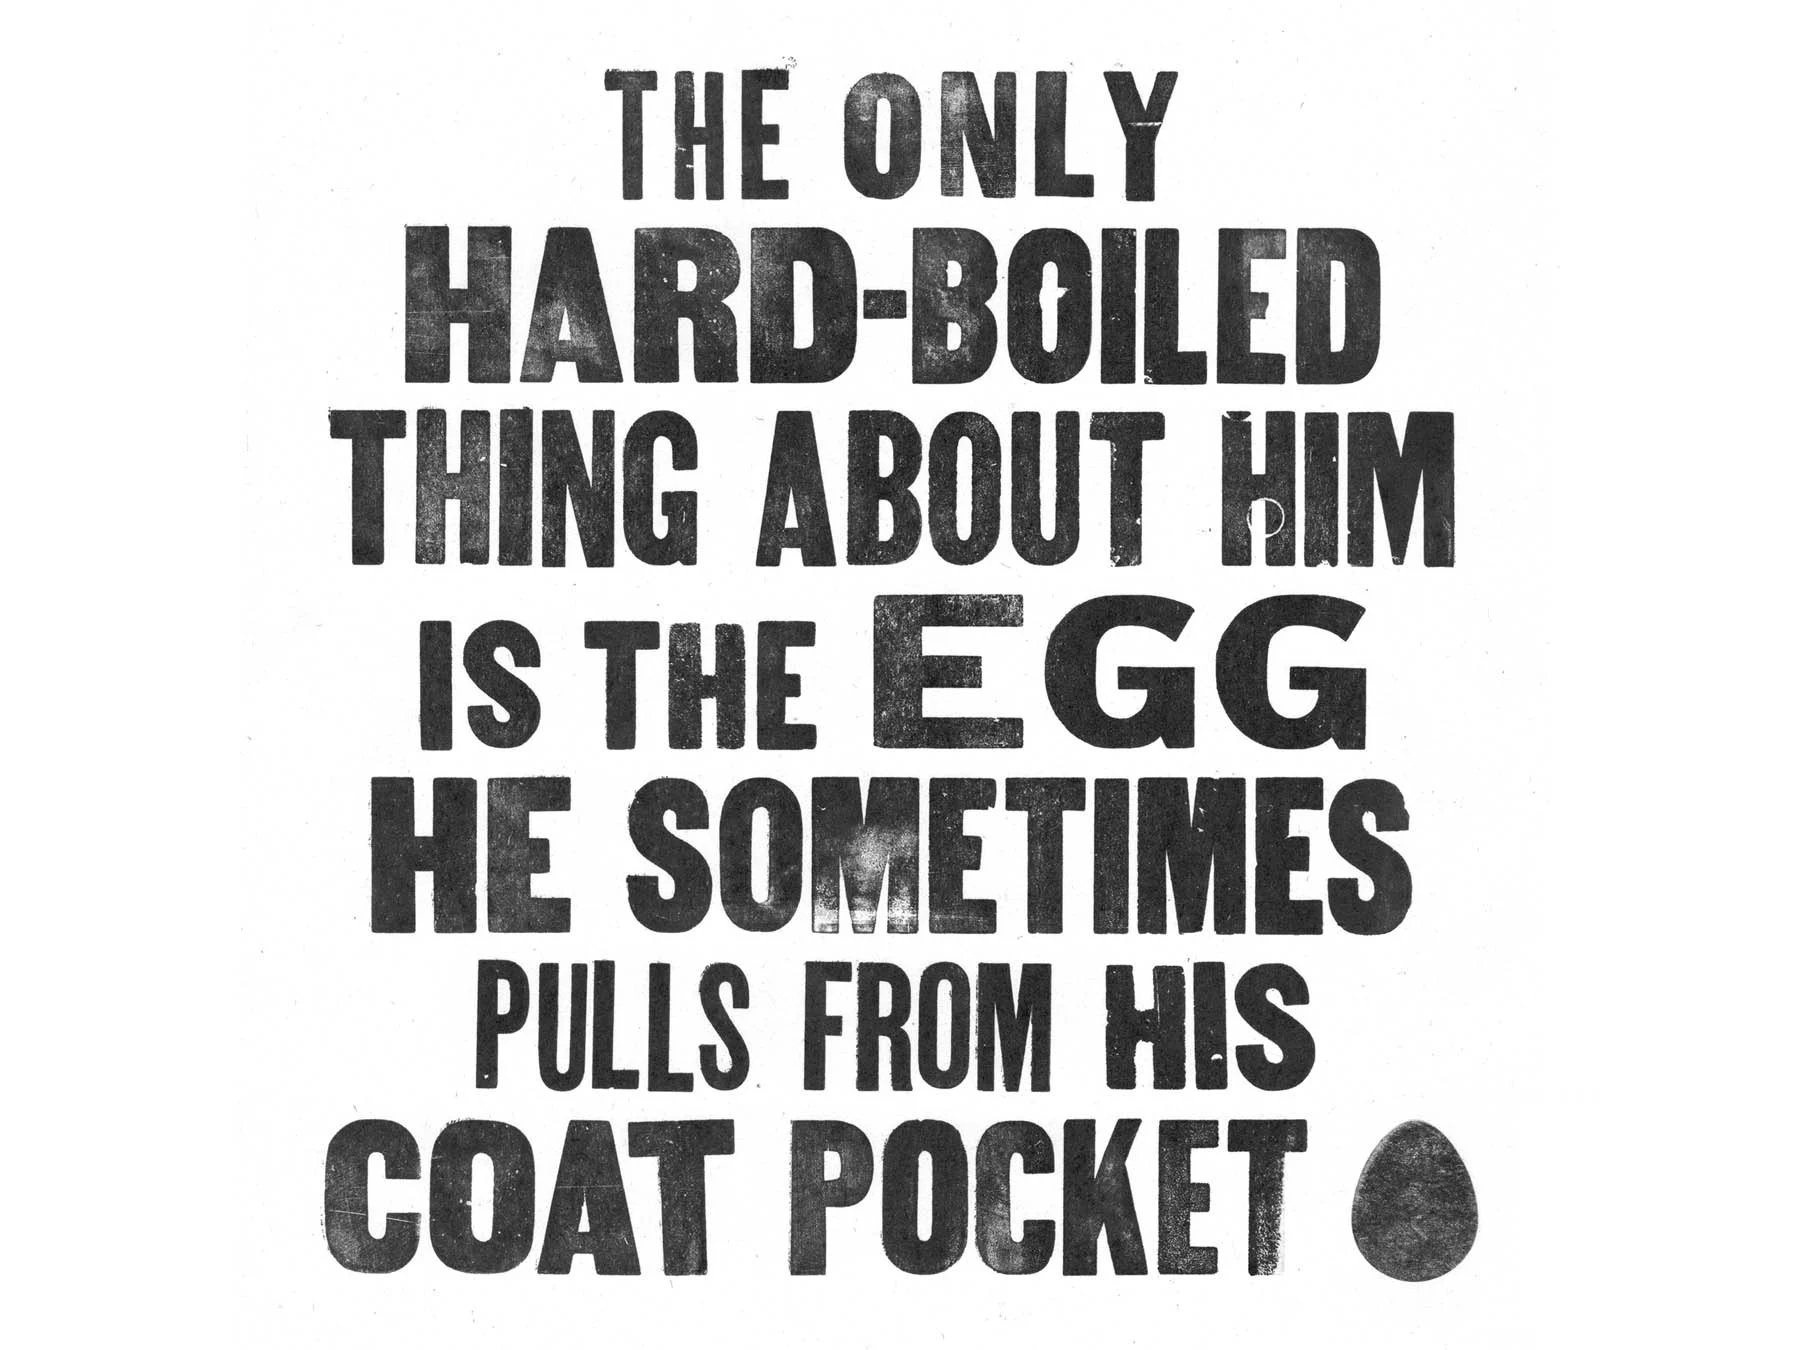 The only hard-boiled thing about him is the egg he sometimes pulls from his coat pocket.